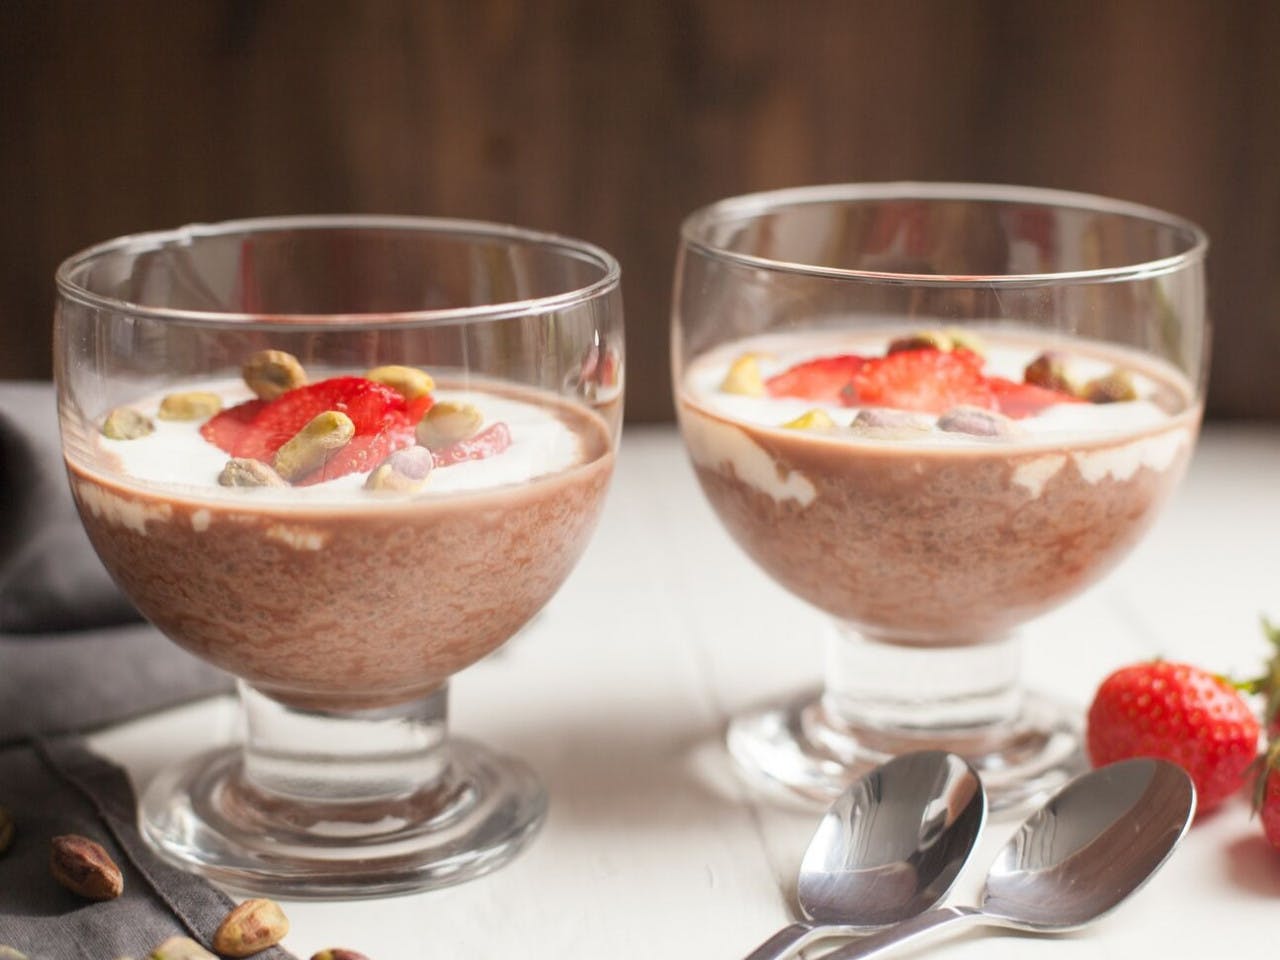 Chia pudding with chocolate, strawberries and pistachio